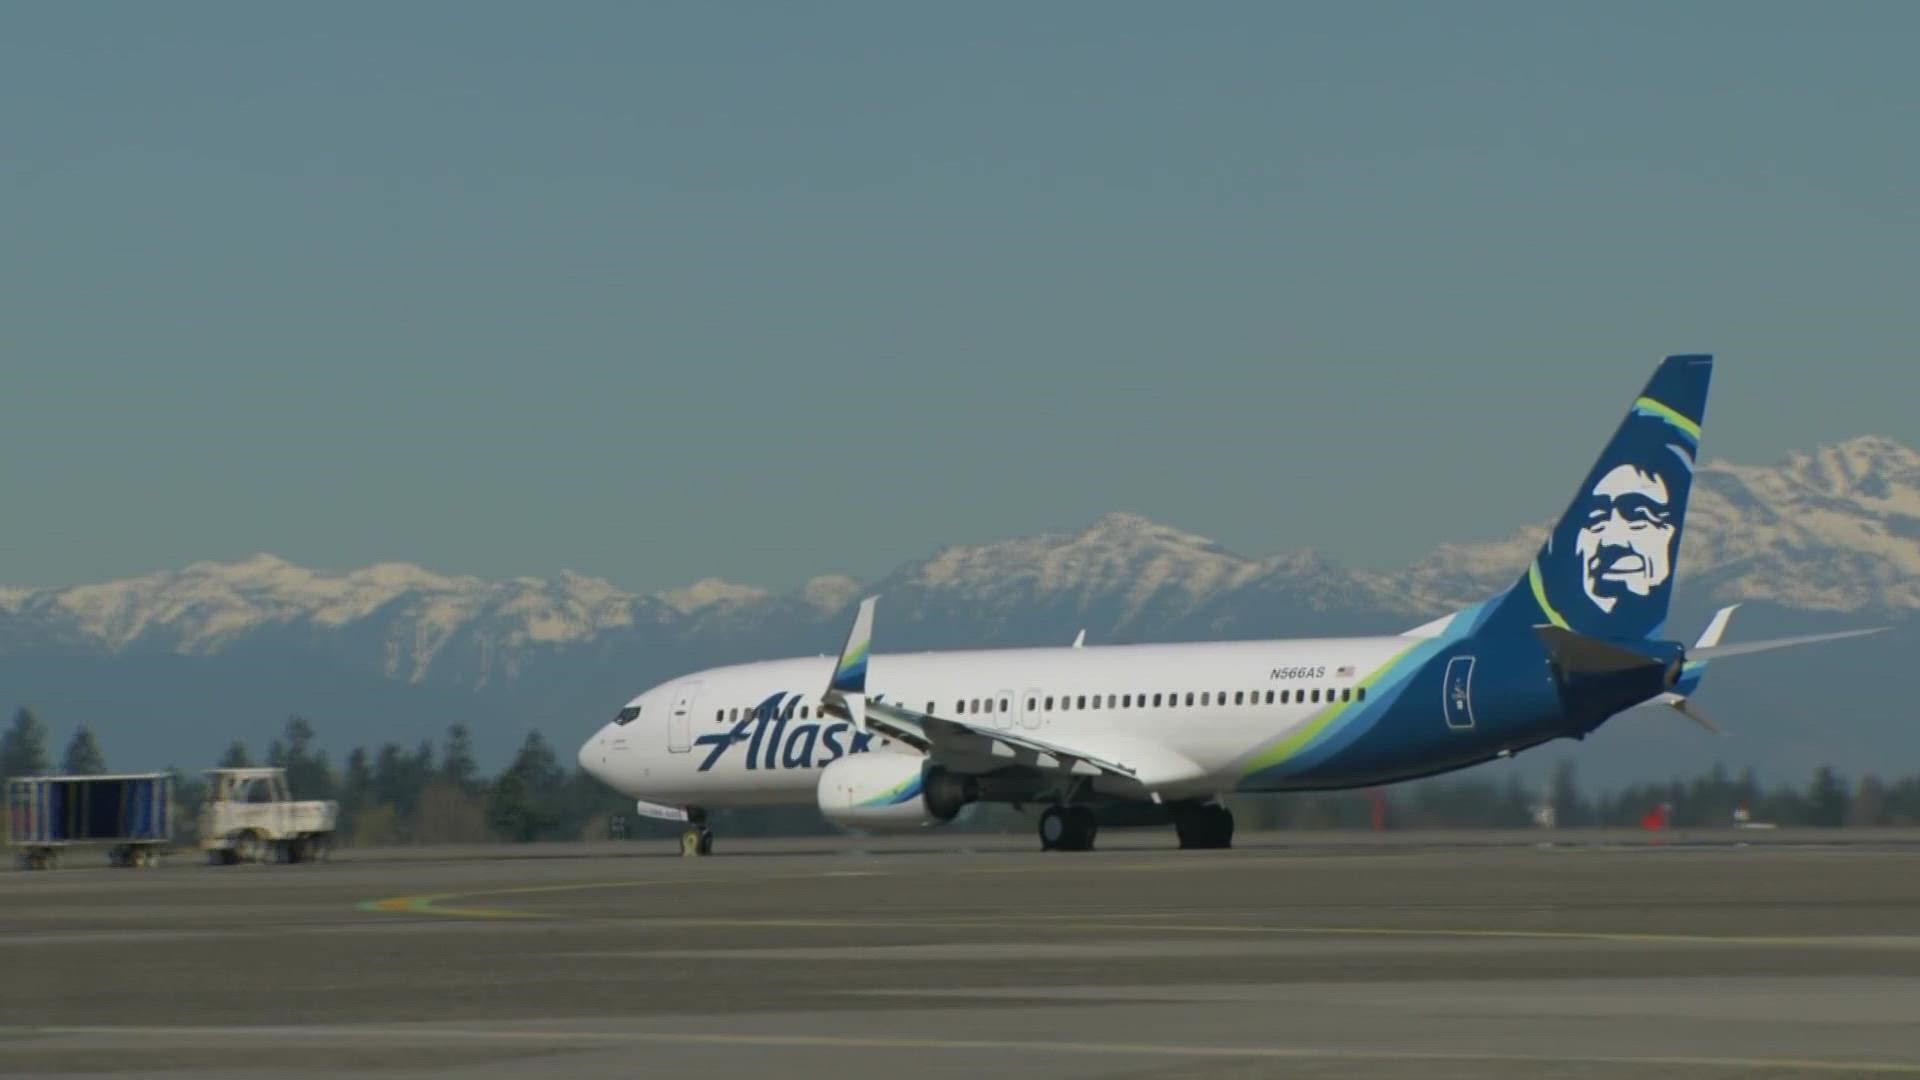 After canceling about 50 flights a day in recent months, Alaska Airlines CEO Ben Minicucci sent a video message to his employees and customers to apologize.